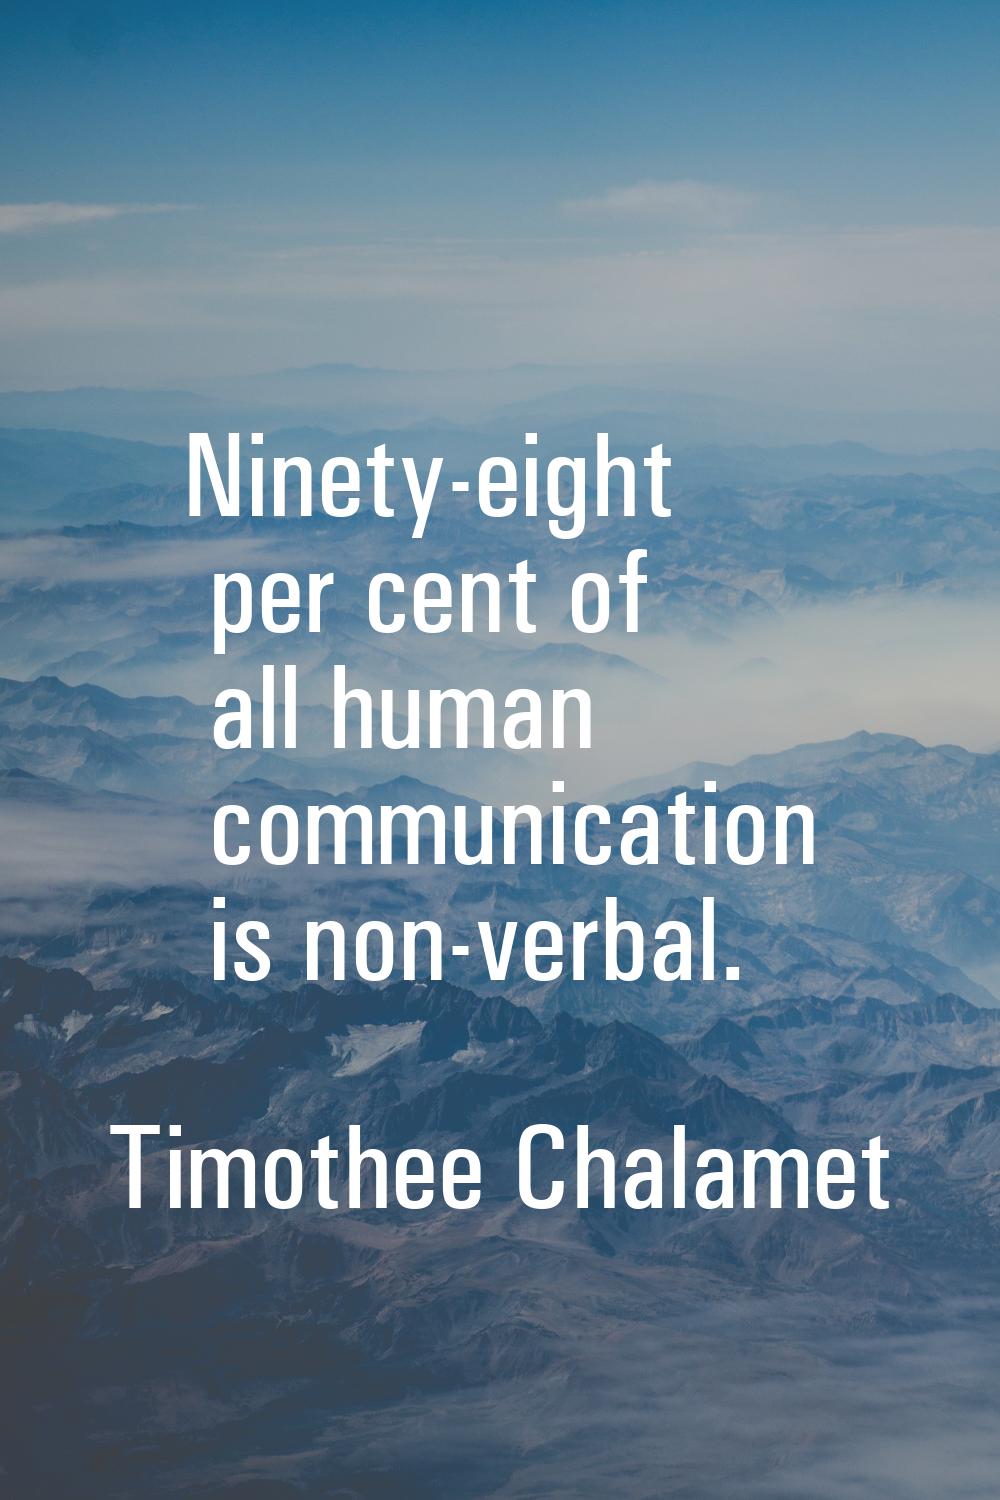 Ninety-eight per cent of all human communication is non-verbal.